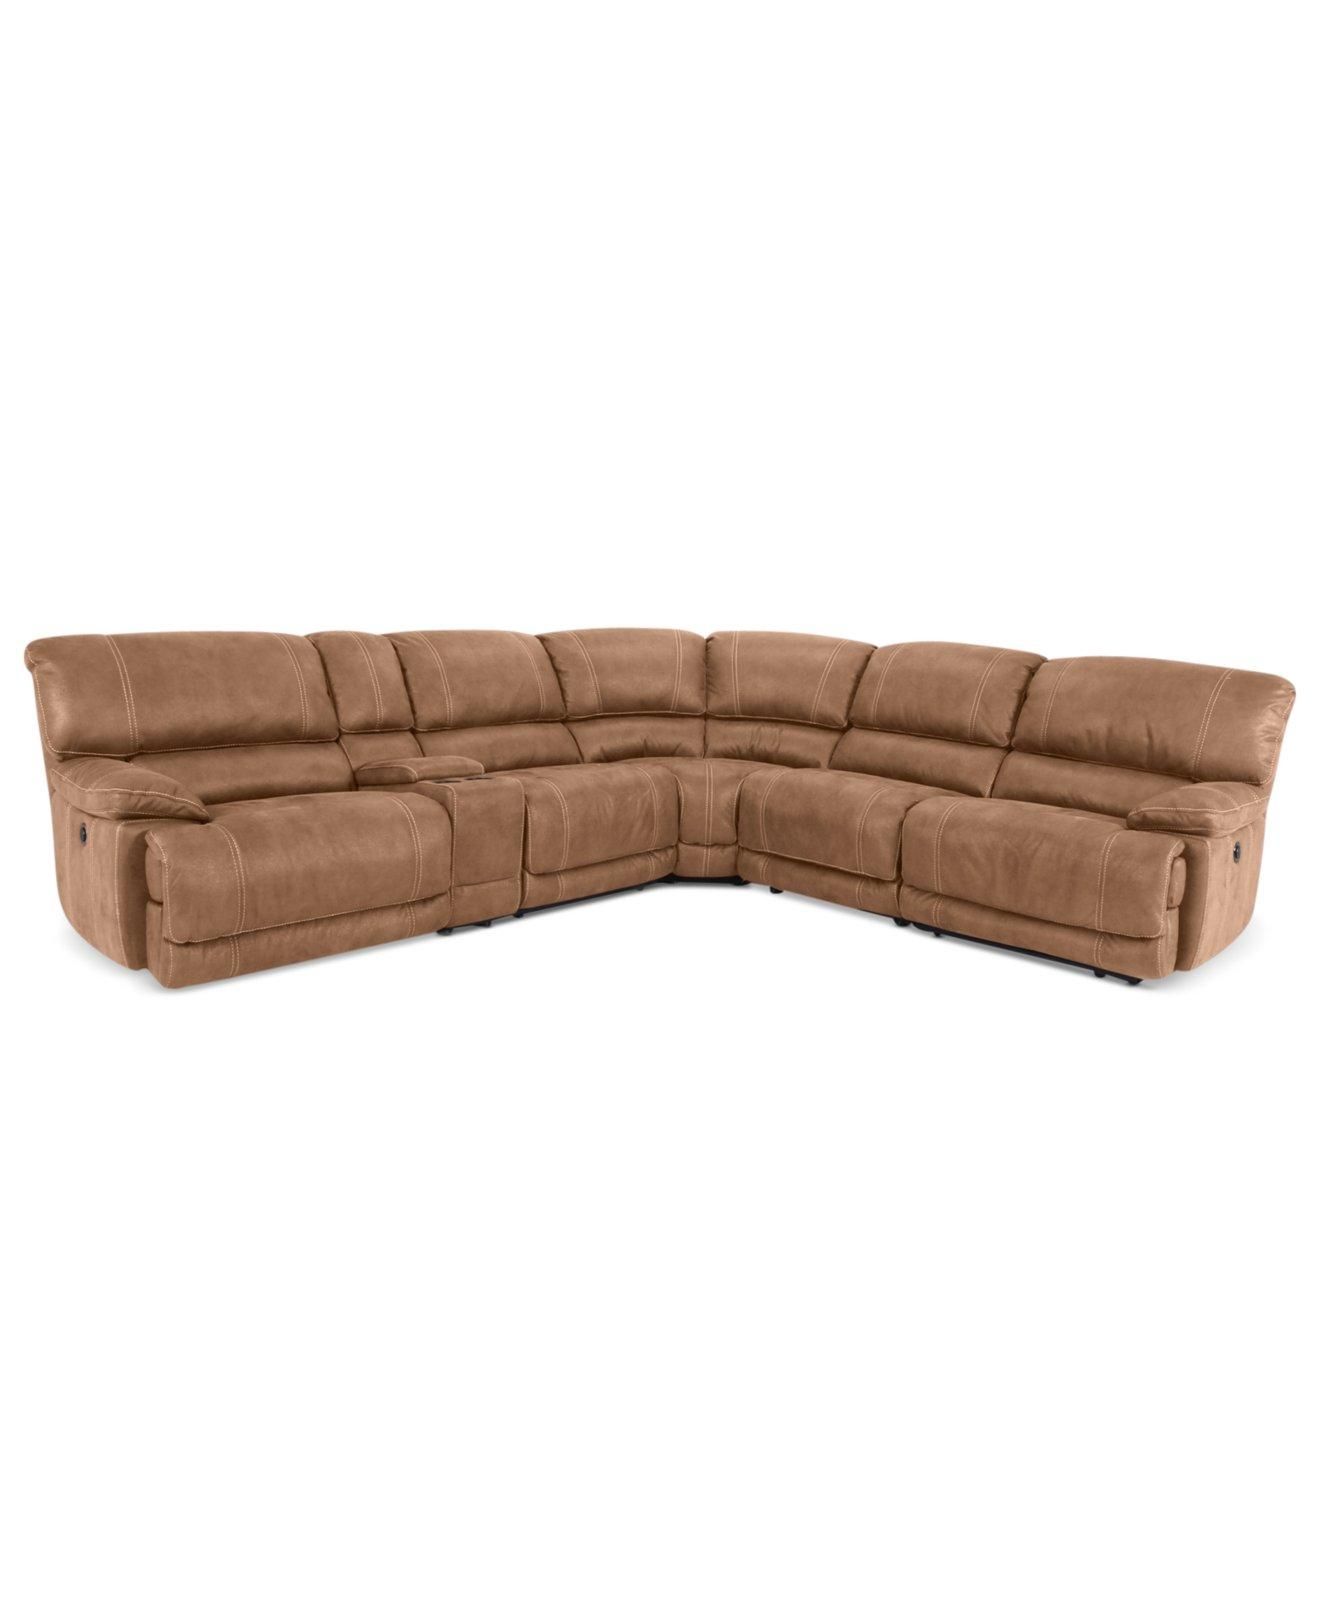 Jedd Fabric 6 Piece Power Reclining Sectional Sofa | Demand Sofas Set With Jedd Fabric Reclining Sectional Sofa (View 19 of 20)